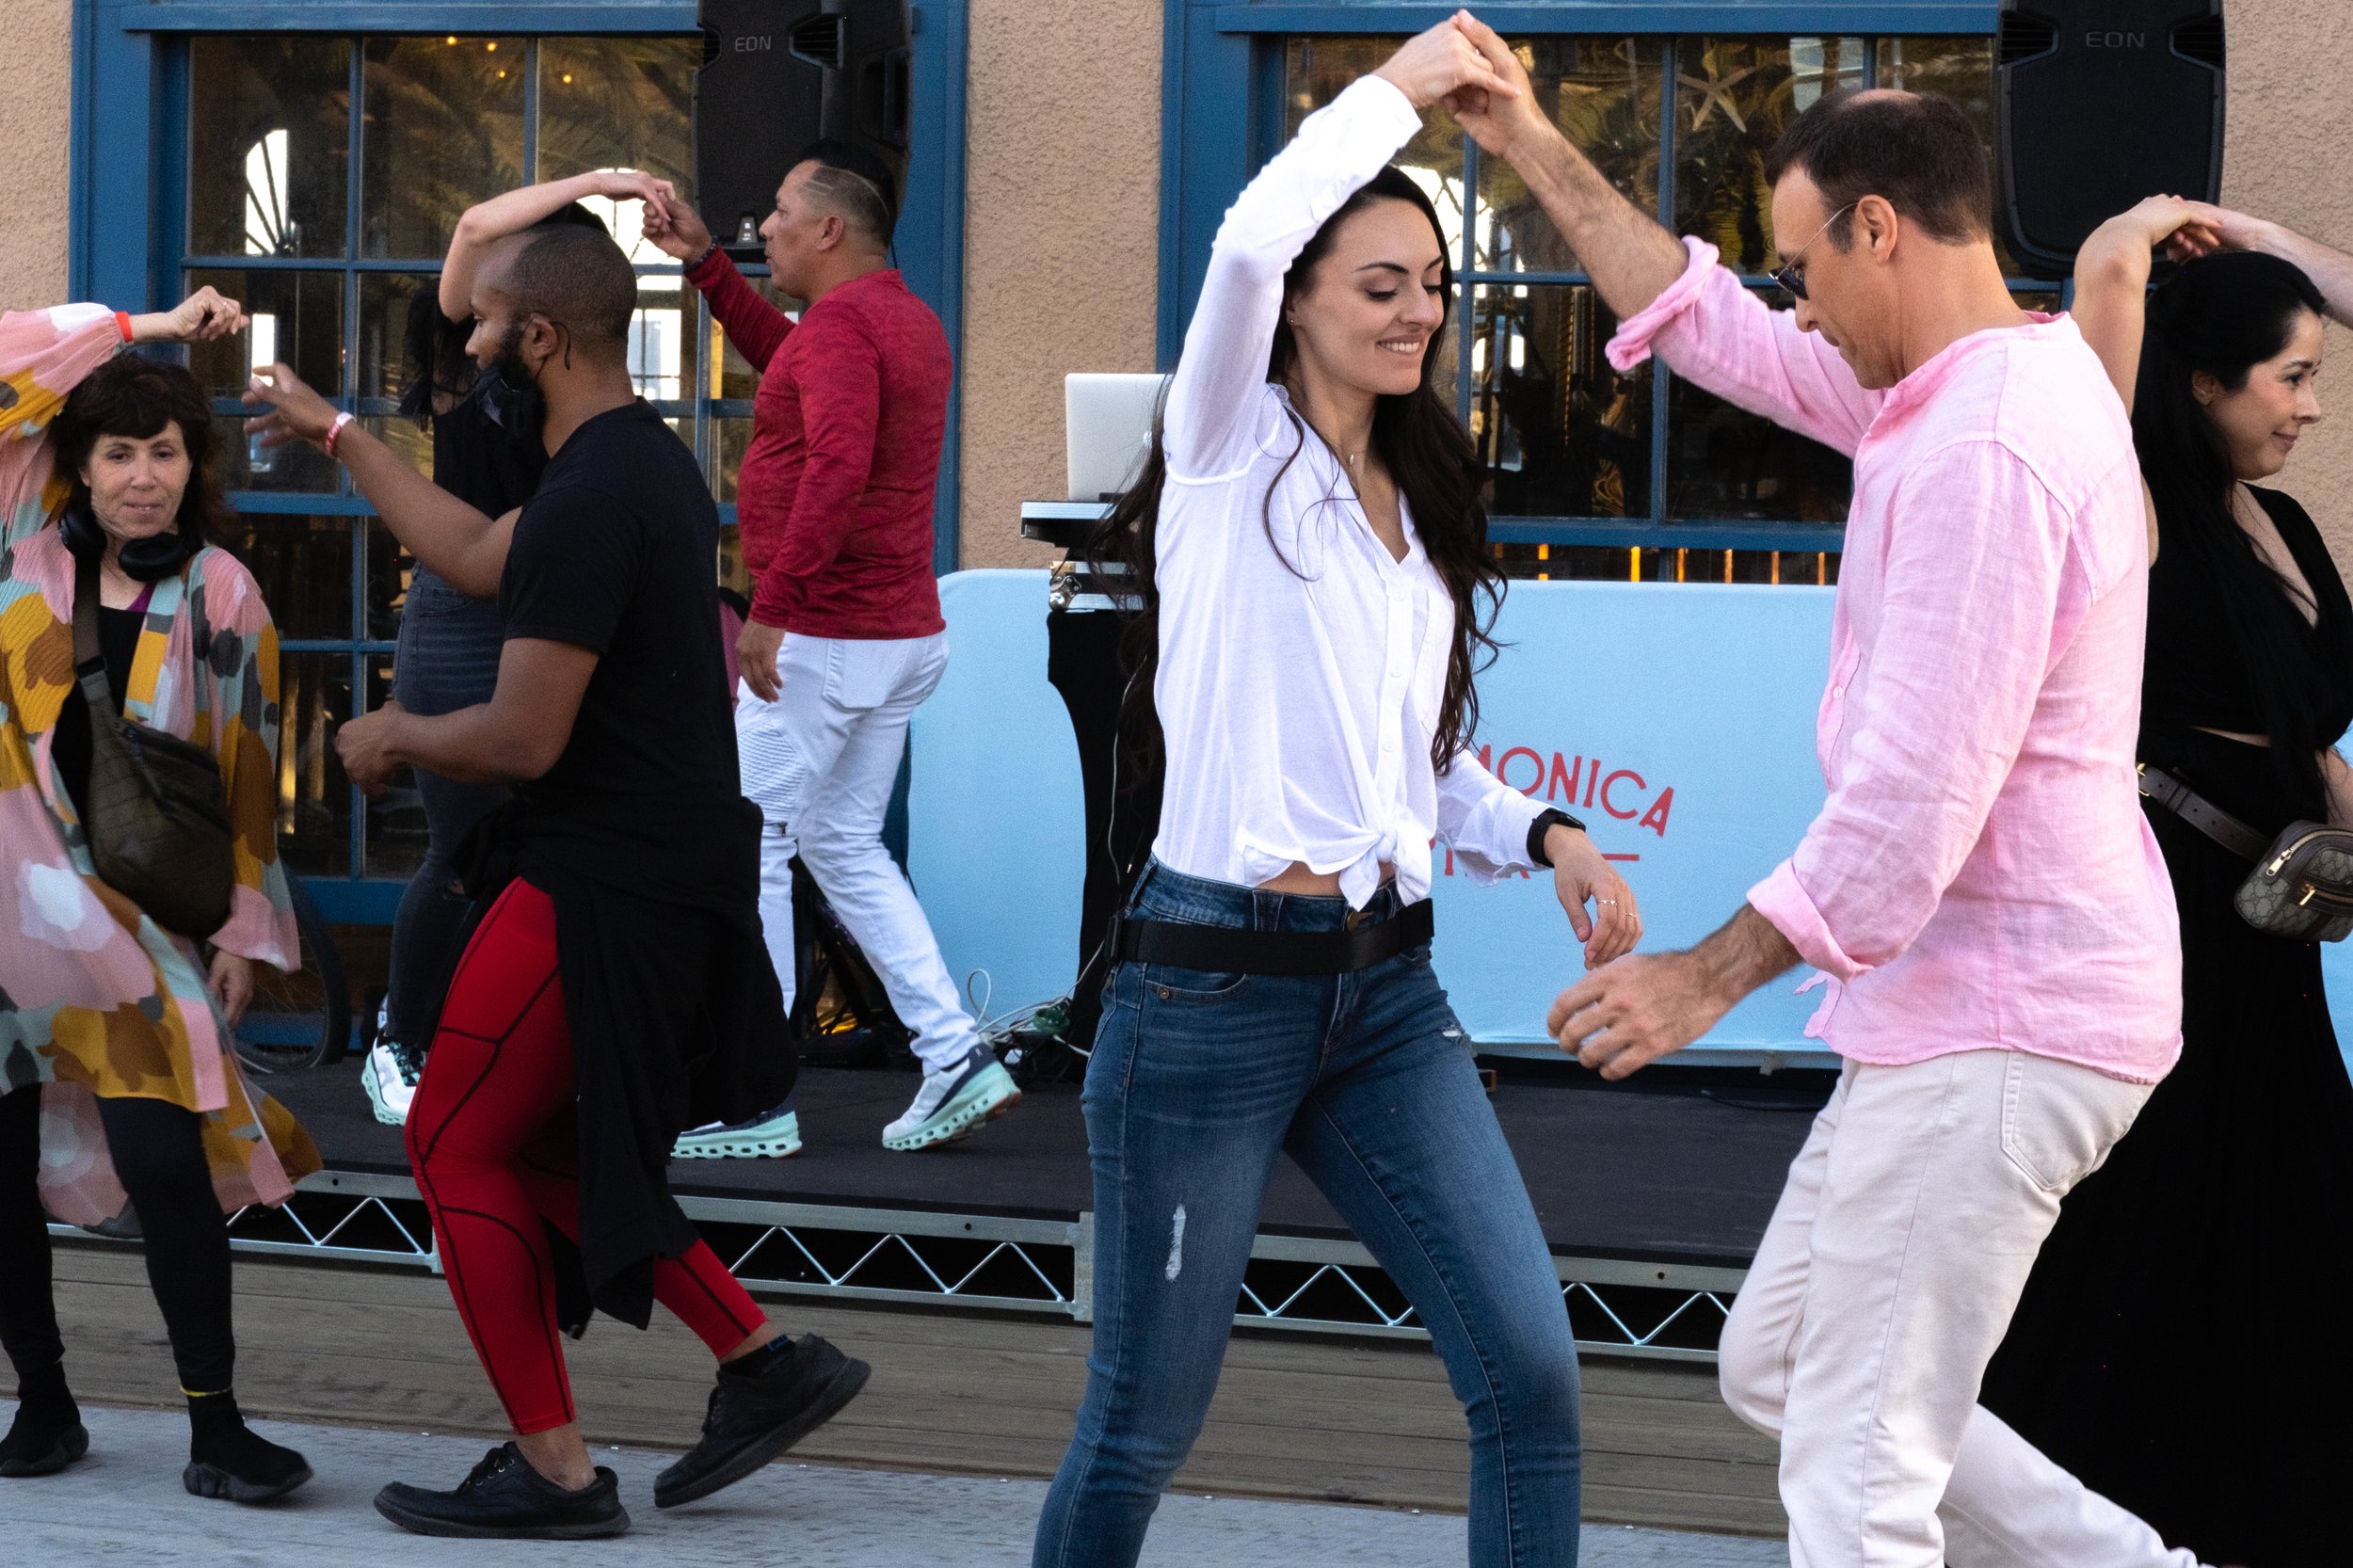  Santa Monica Pier in Santa Monica, Calif. hosts Locals' Night every third Thursday with free programming from 4:00pm to 10:00pm. Salsa lessons teach beginners basic moves on the East Merry-Go-Round deck on Thursday, April 20, 2023. (Akemi Rico | The